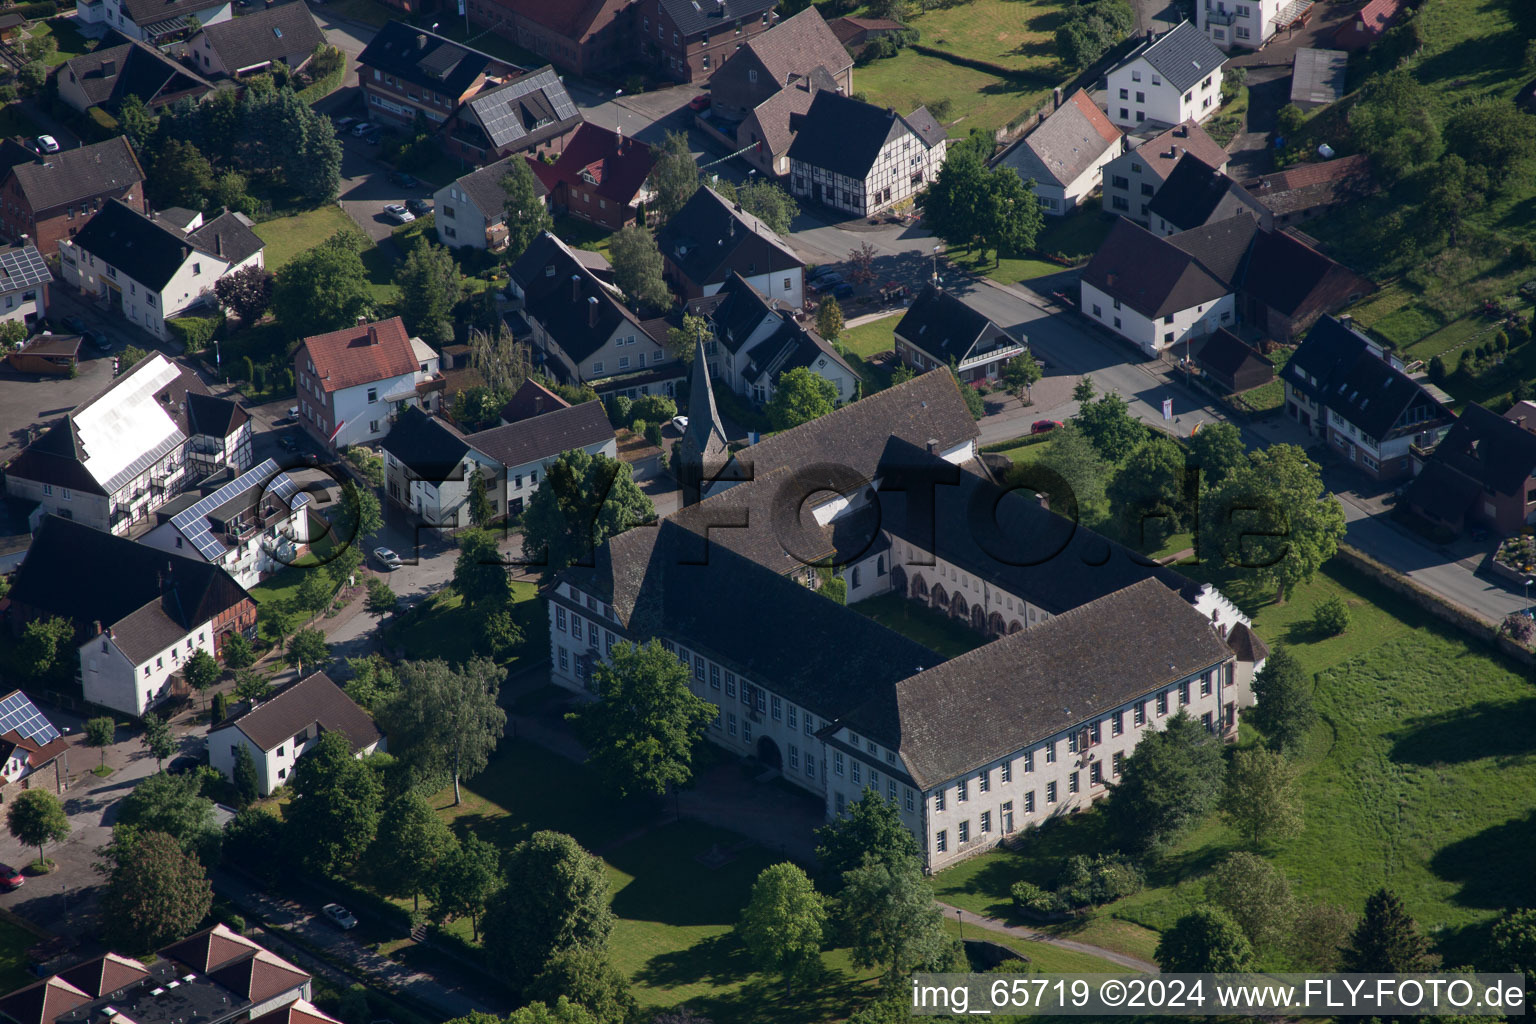 Aerial view of Complex of buildings of the monastery Koptisch-Othodoxes Kloster Propsteistrasse in the district Brenkhausen in Hoexter in the state North Rhine-Westphalia